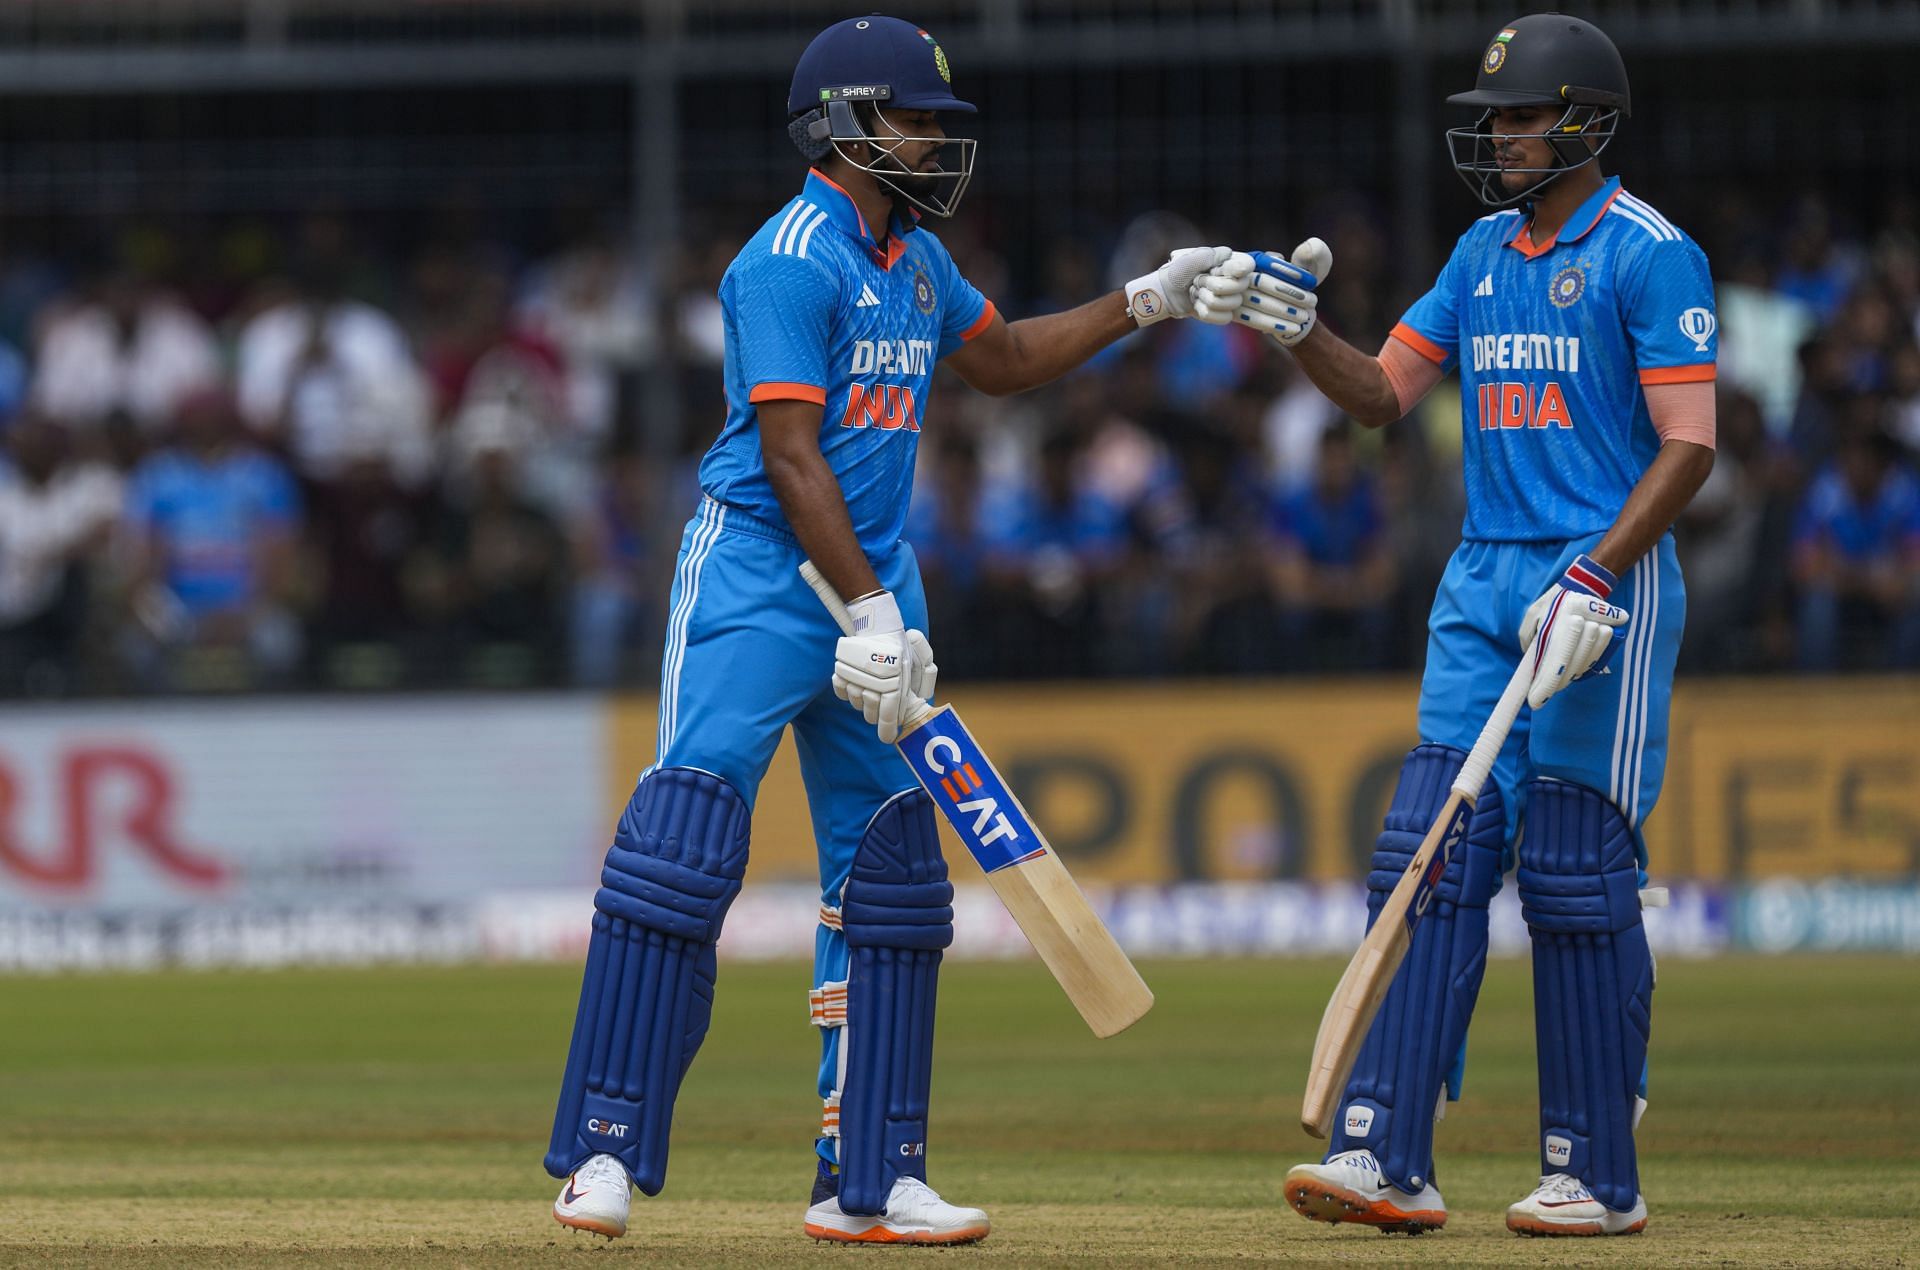 Shreyas Iyer and Shubman Gill piled up 200 runs together [Getty Images]